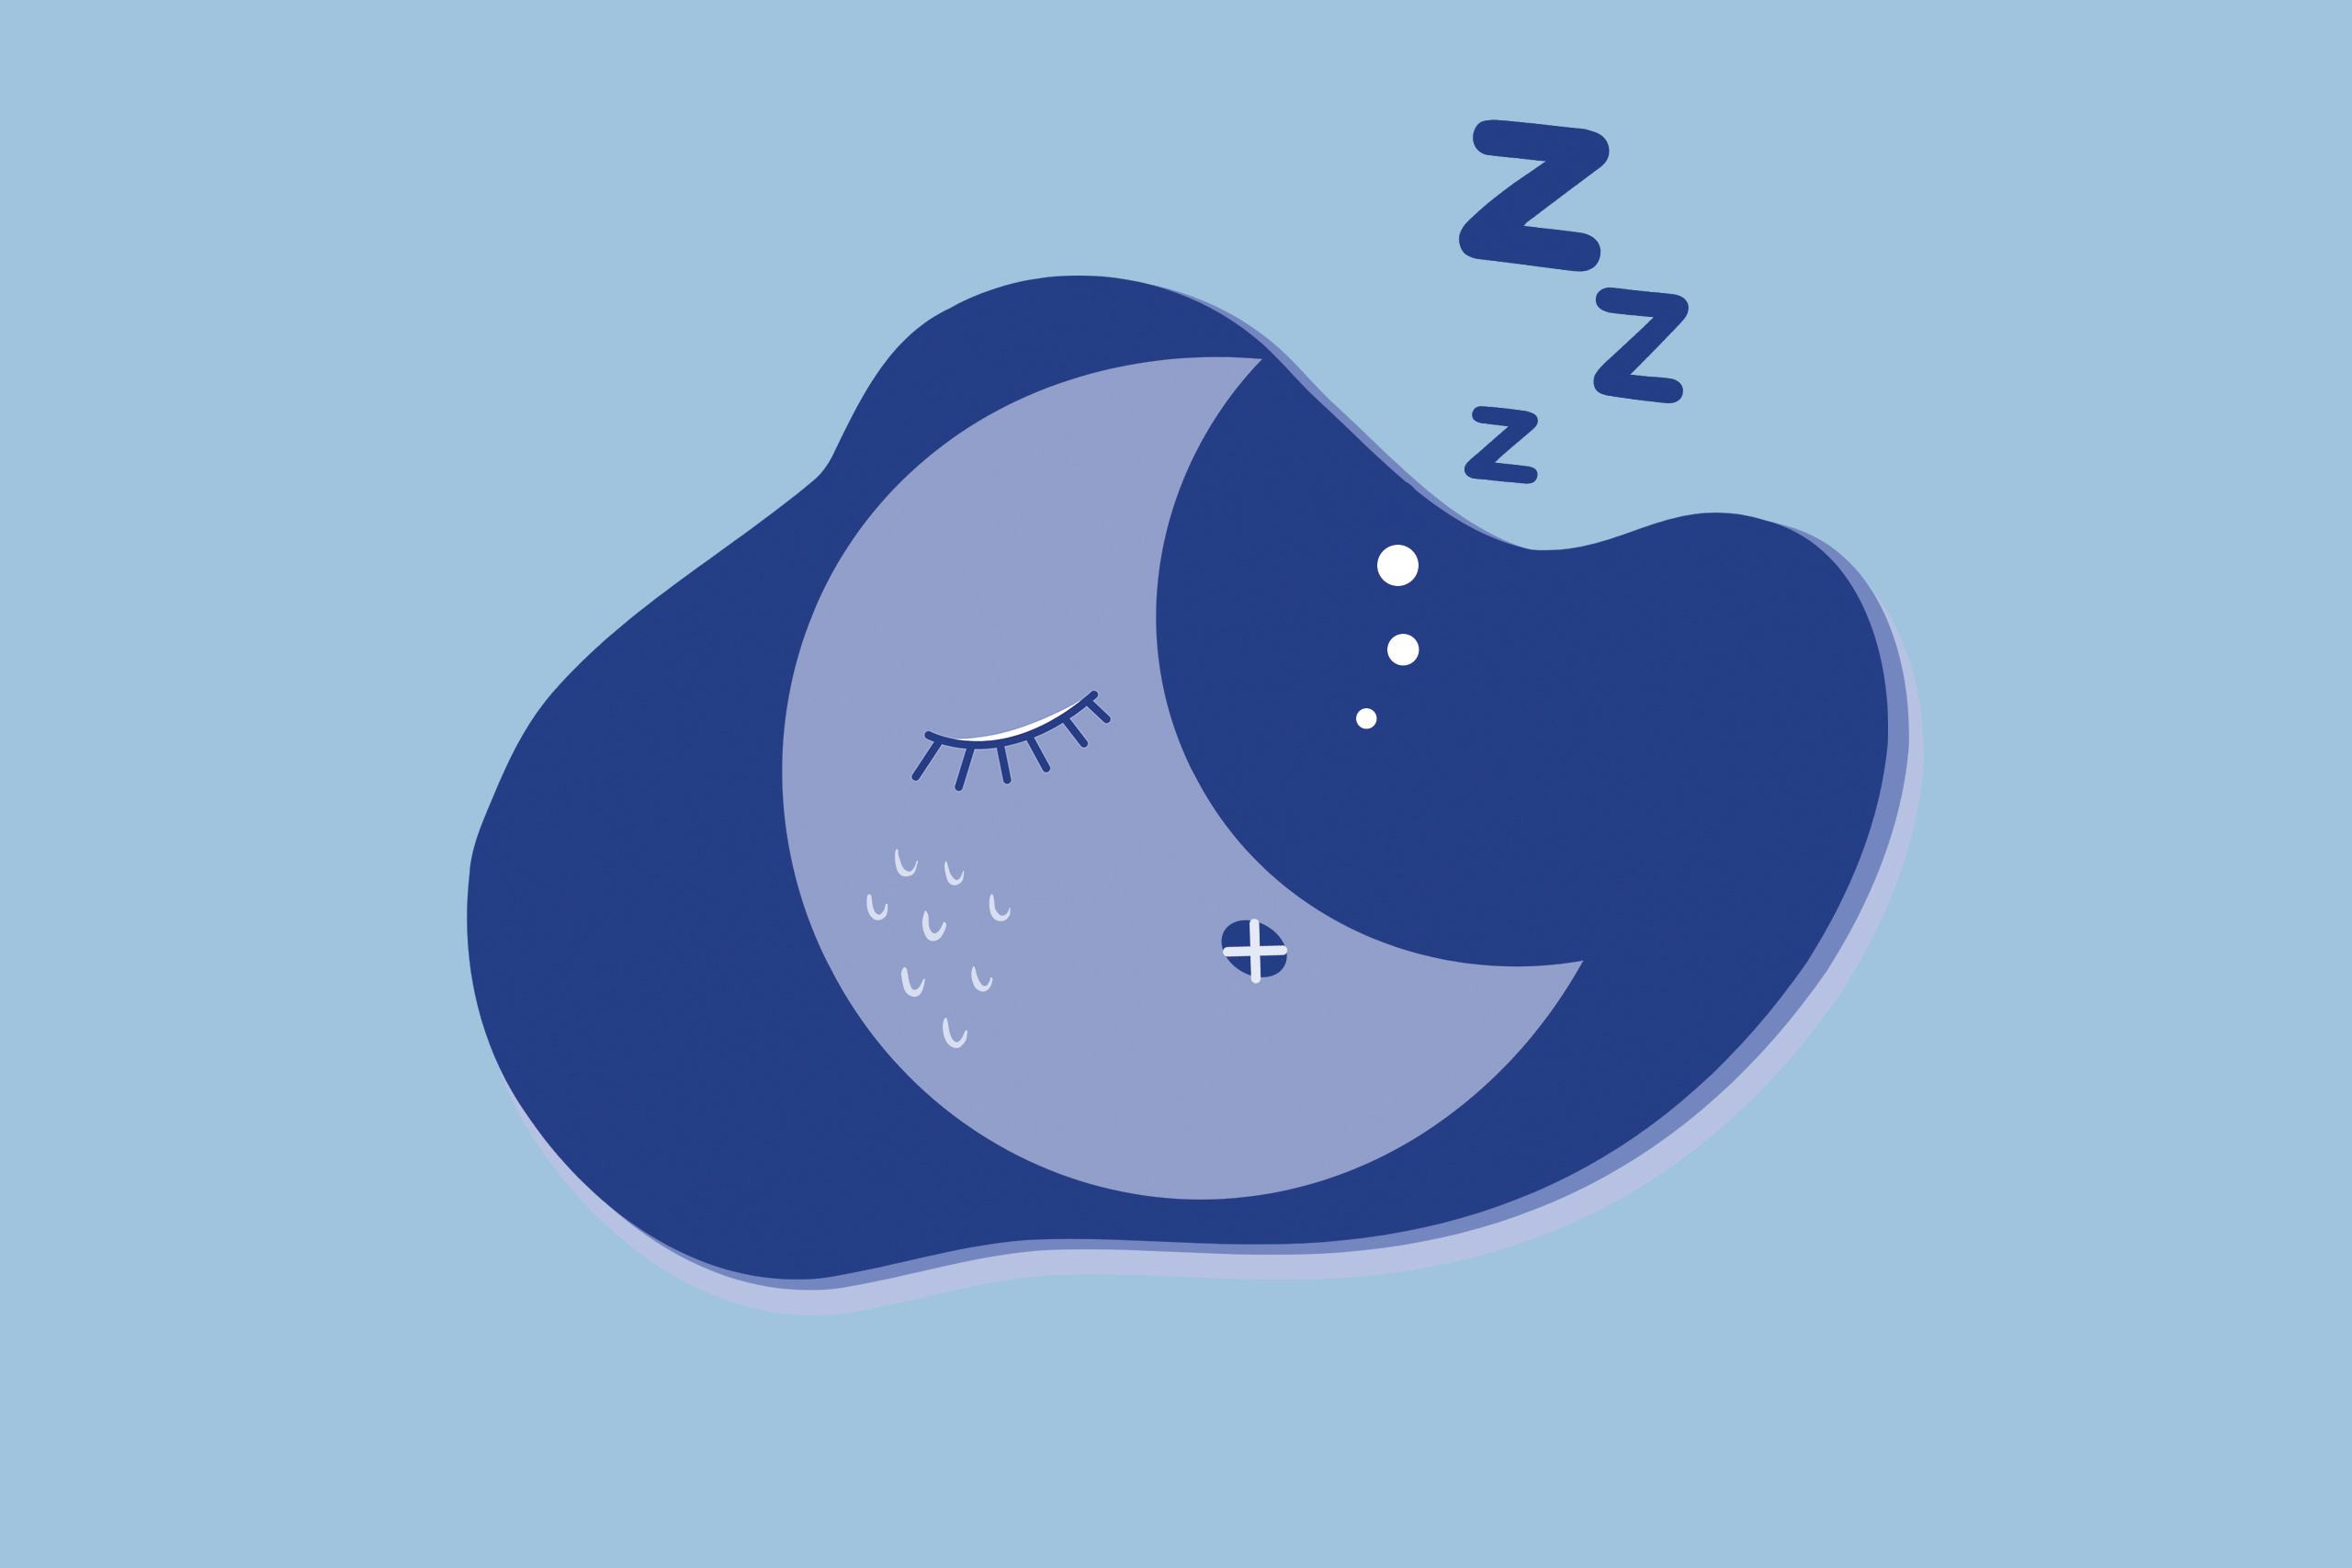 Obstructive and Central Sleep Apnea: What’s the Difference?